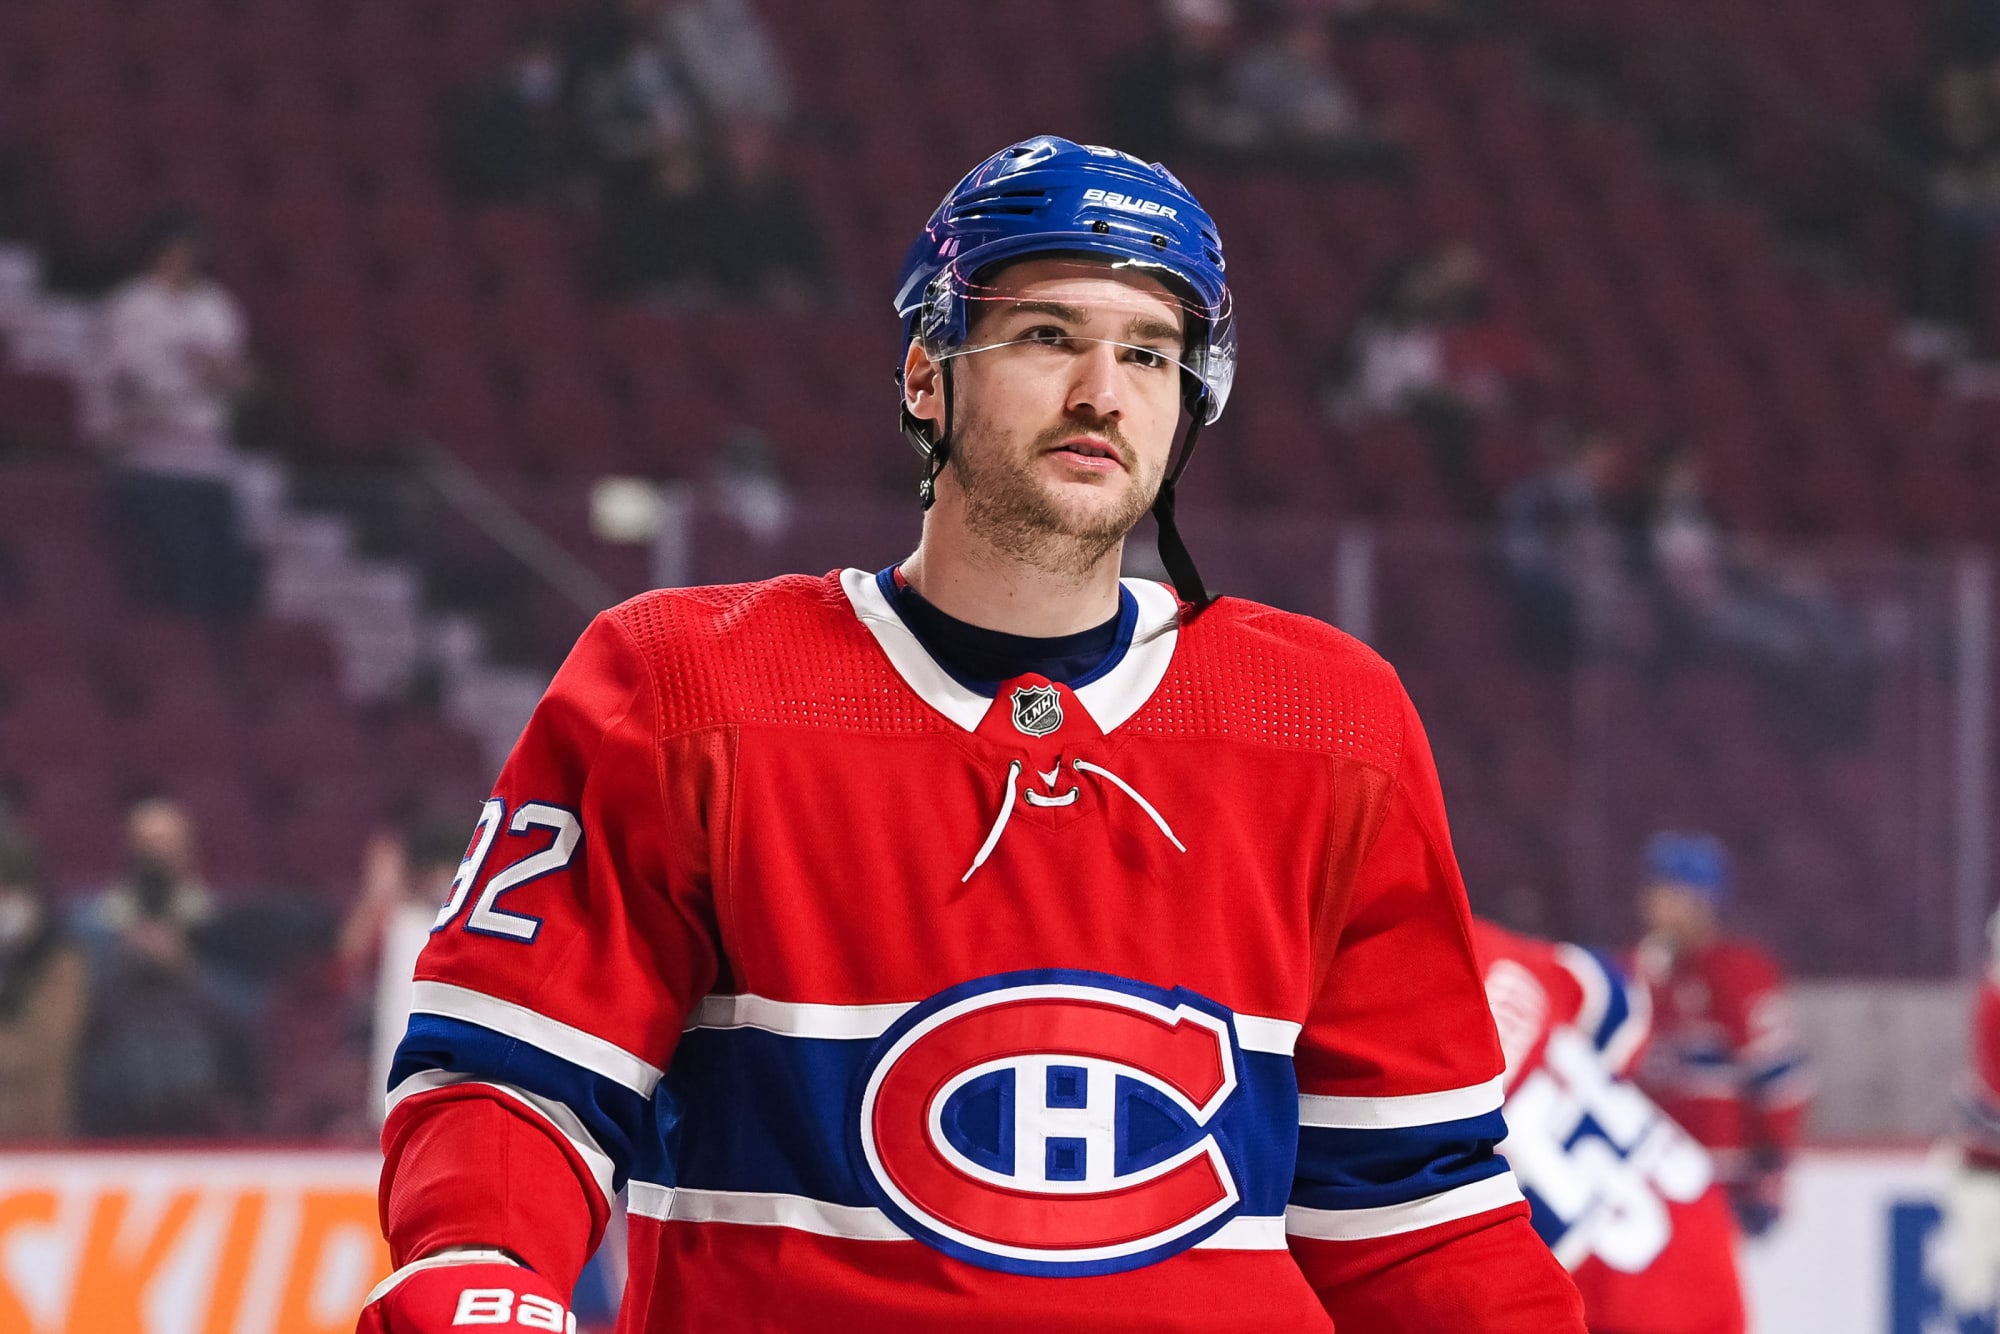 Montreal Canadiens: Jonathan Drouin’s Tale Of A Last Chance